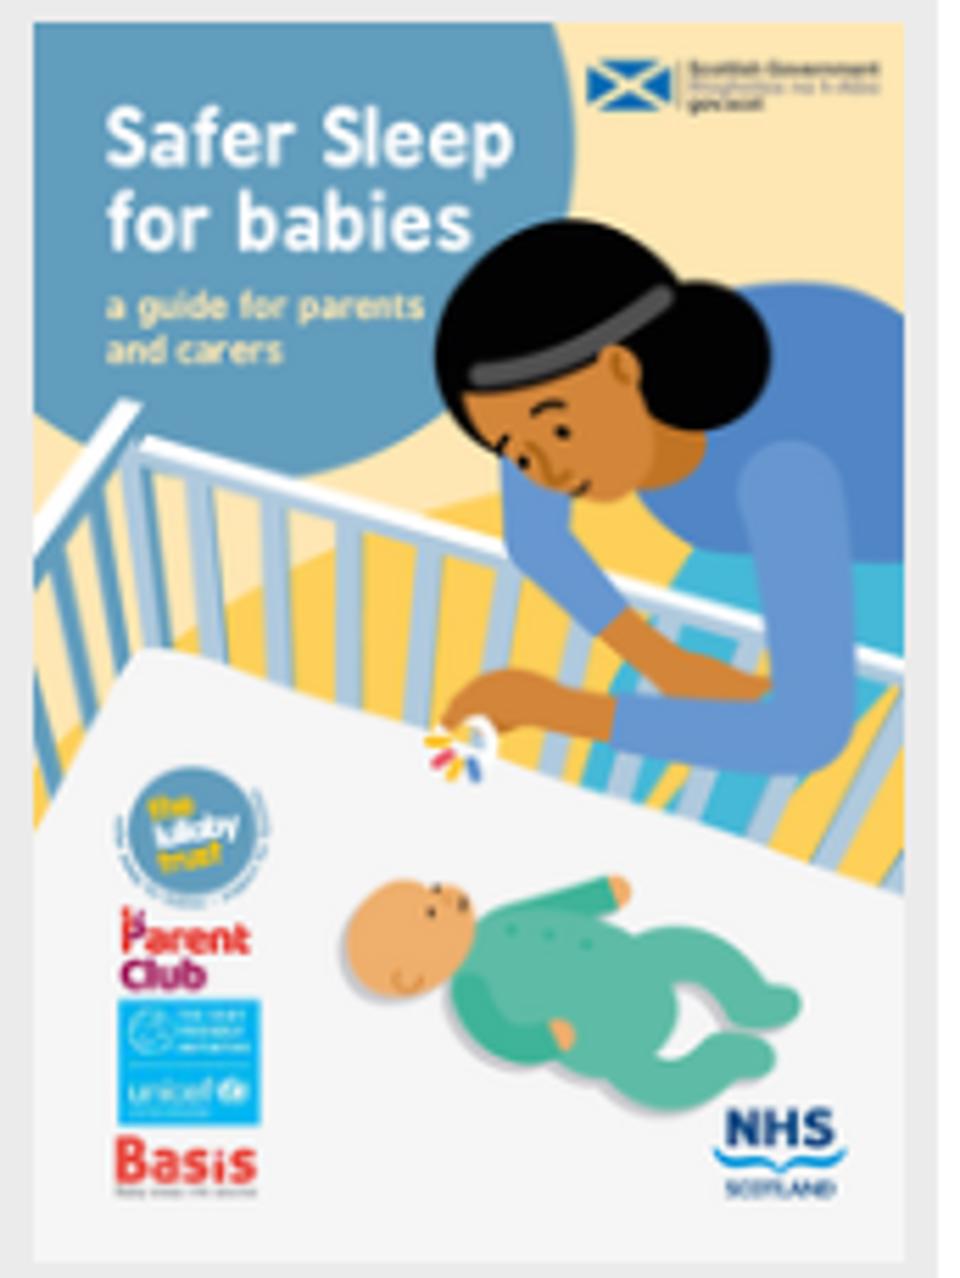 Safer Sleep For Babies guide